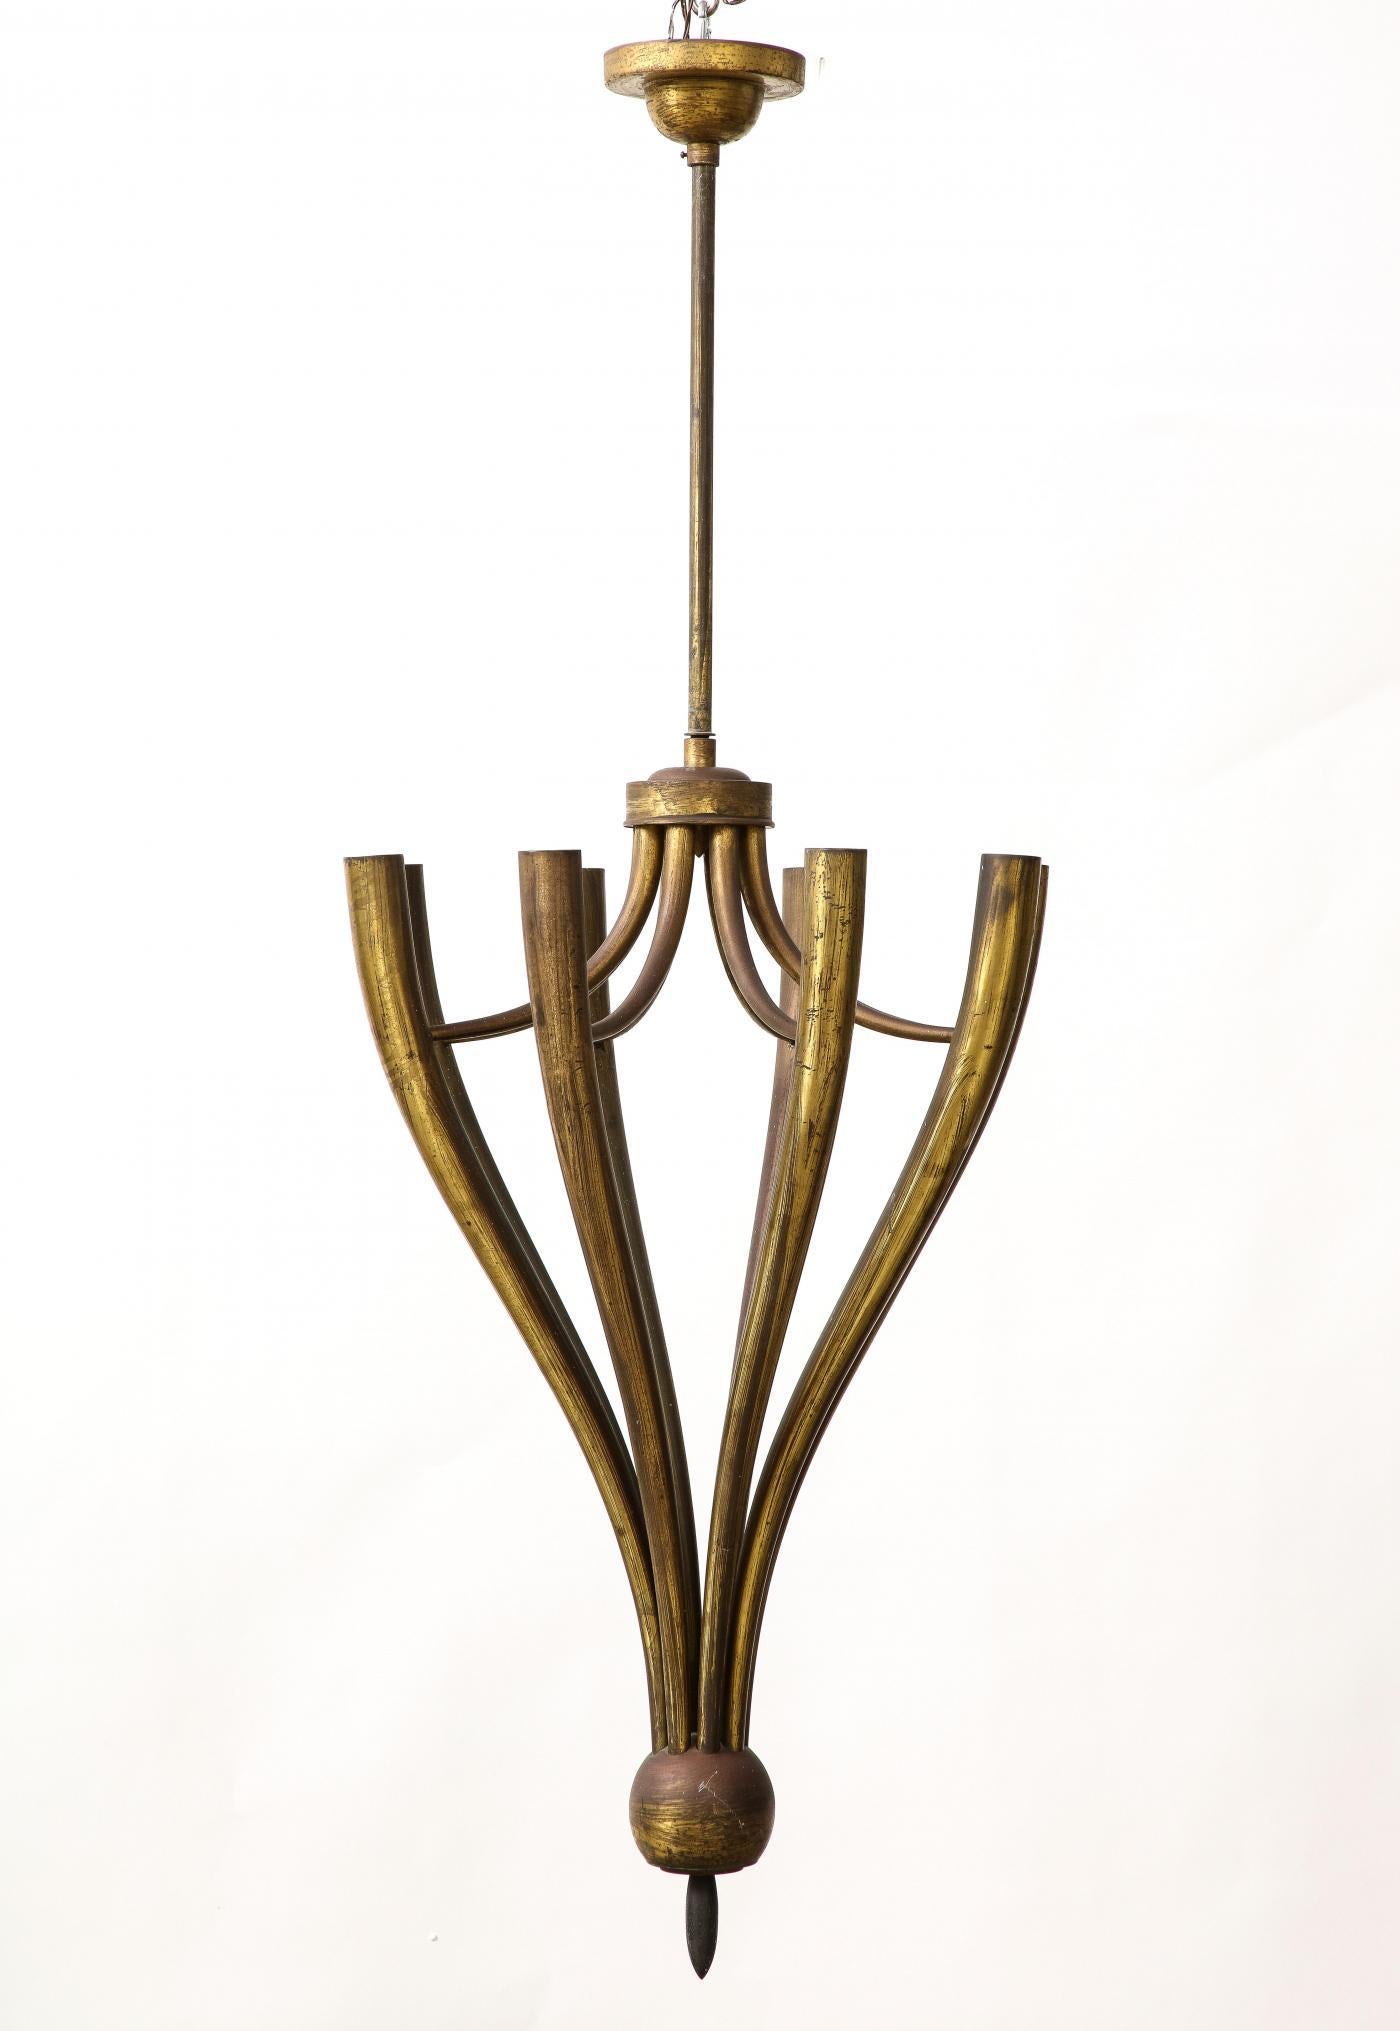 Mid-20th Century Eight-Arm Patinated Brass Chandelier by Guglielmo Ulrich, Italy, c. 1950 For Sale